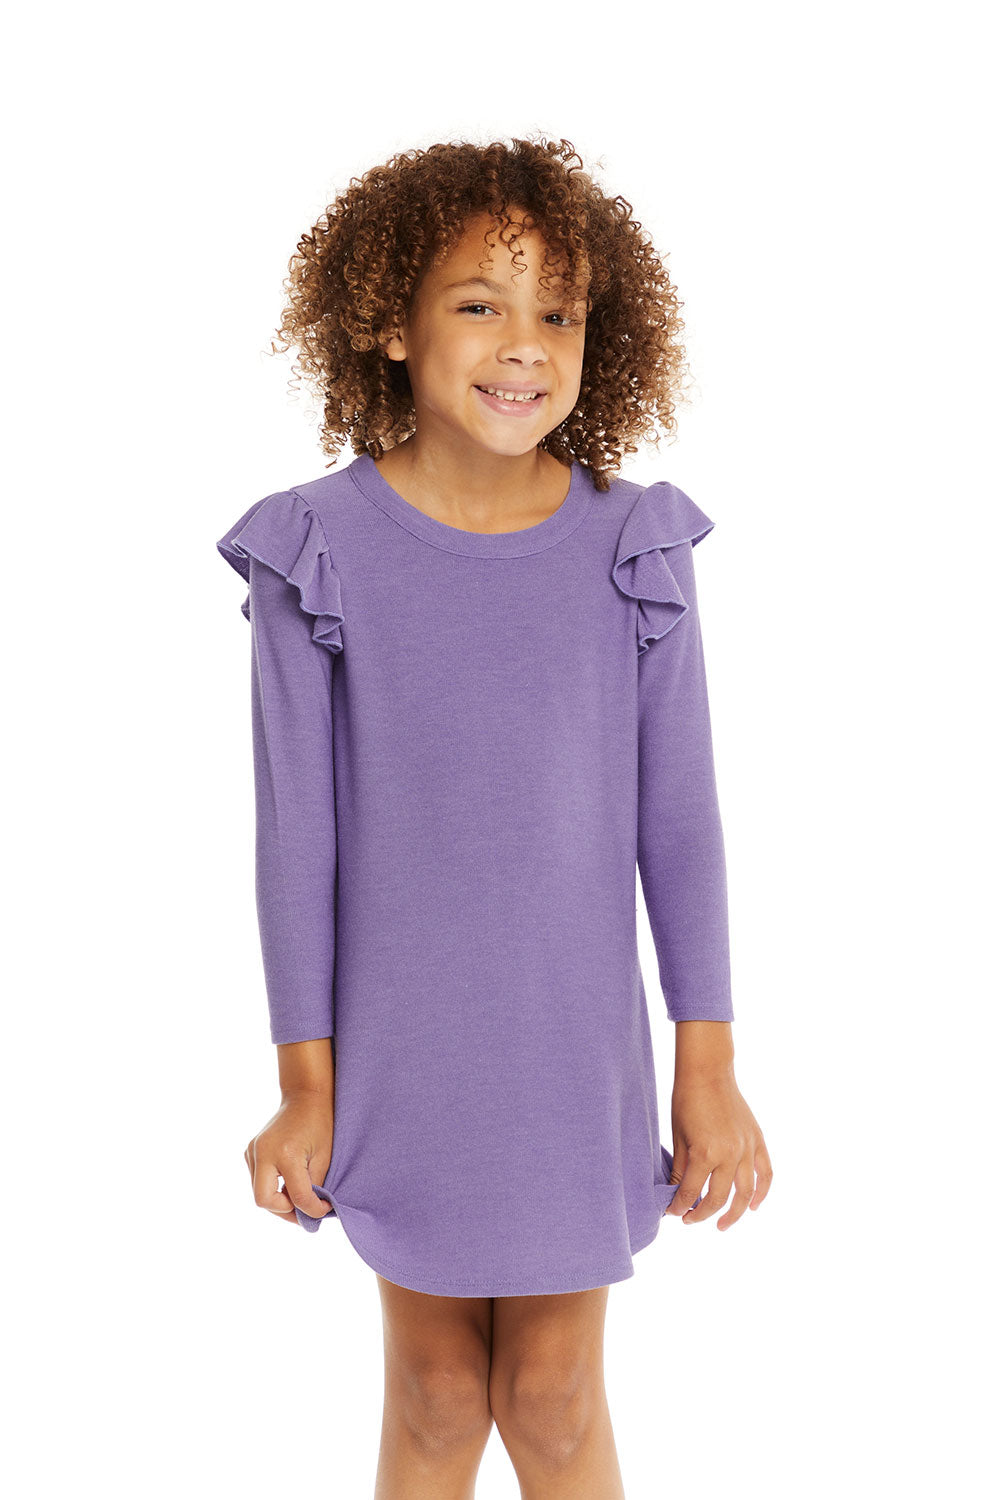 Long Sleeve Veronica Purple Dress with Shoulder Ruffle GIRLS chaserbrand